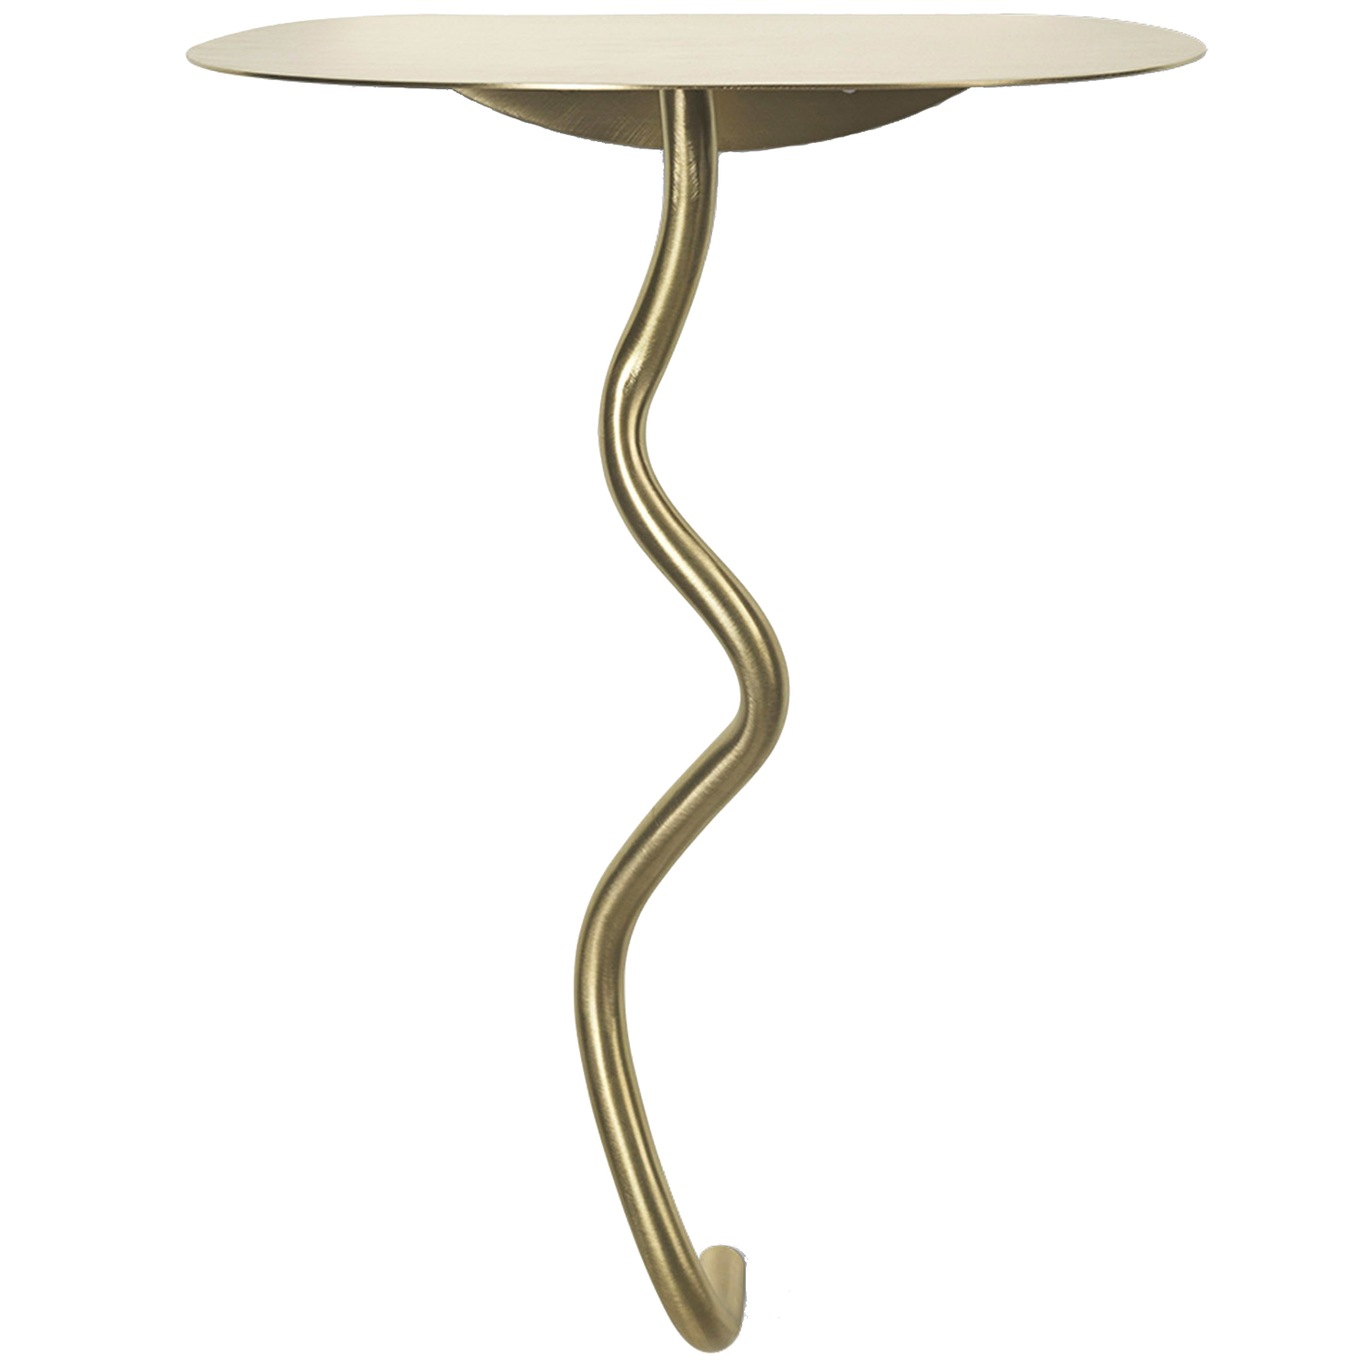 Curvature Wall Table- Black Brass Tisch, Messing